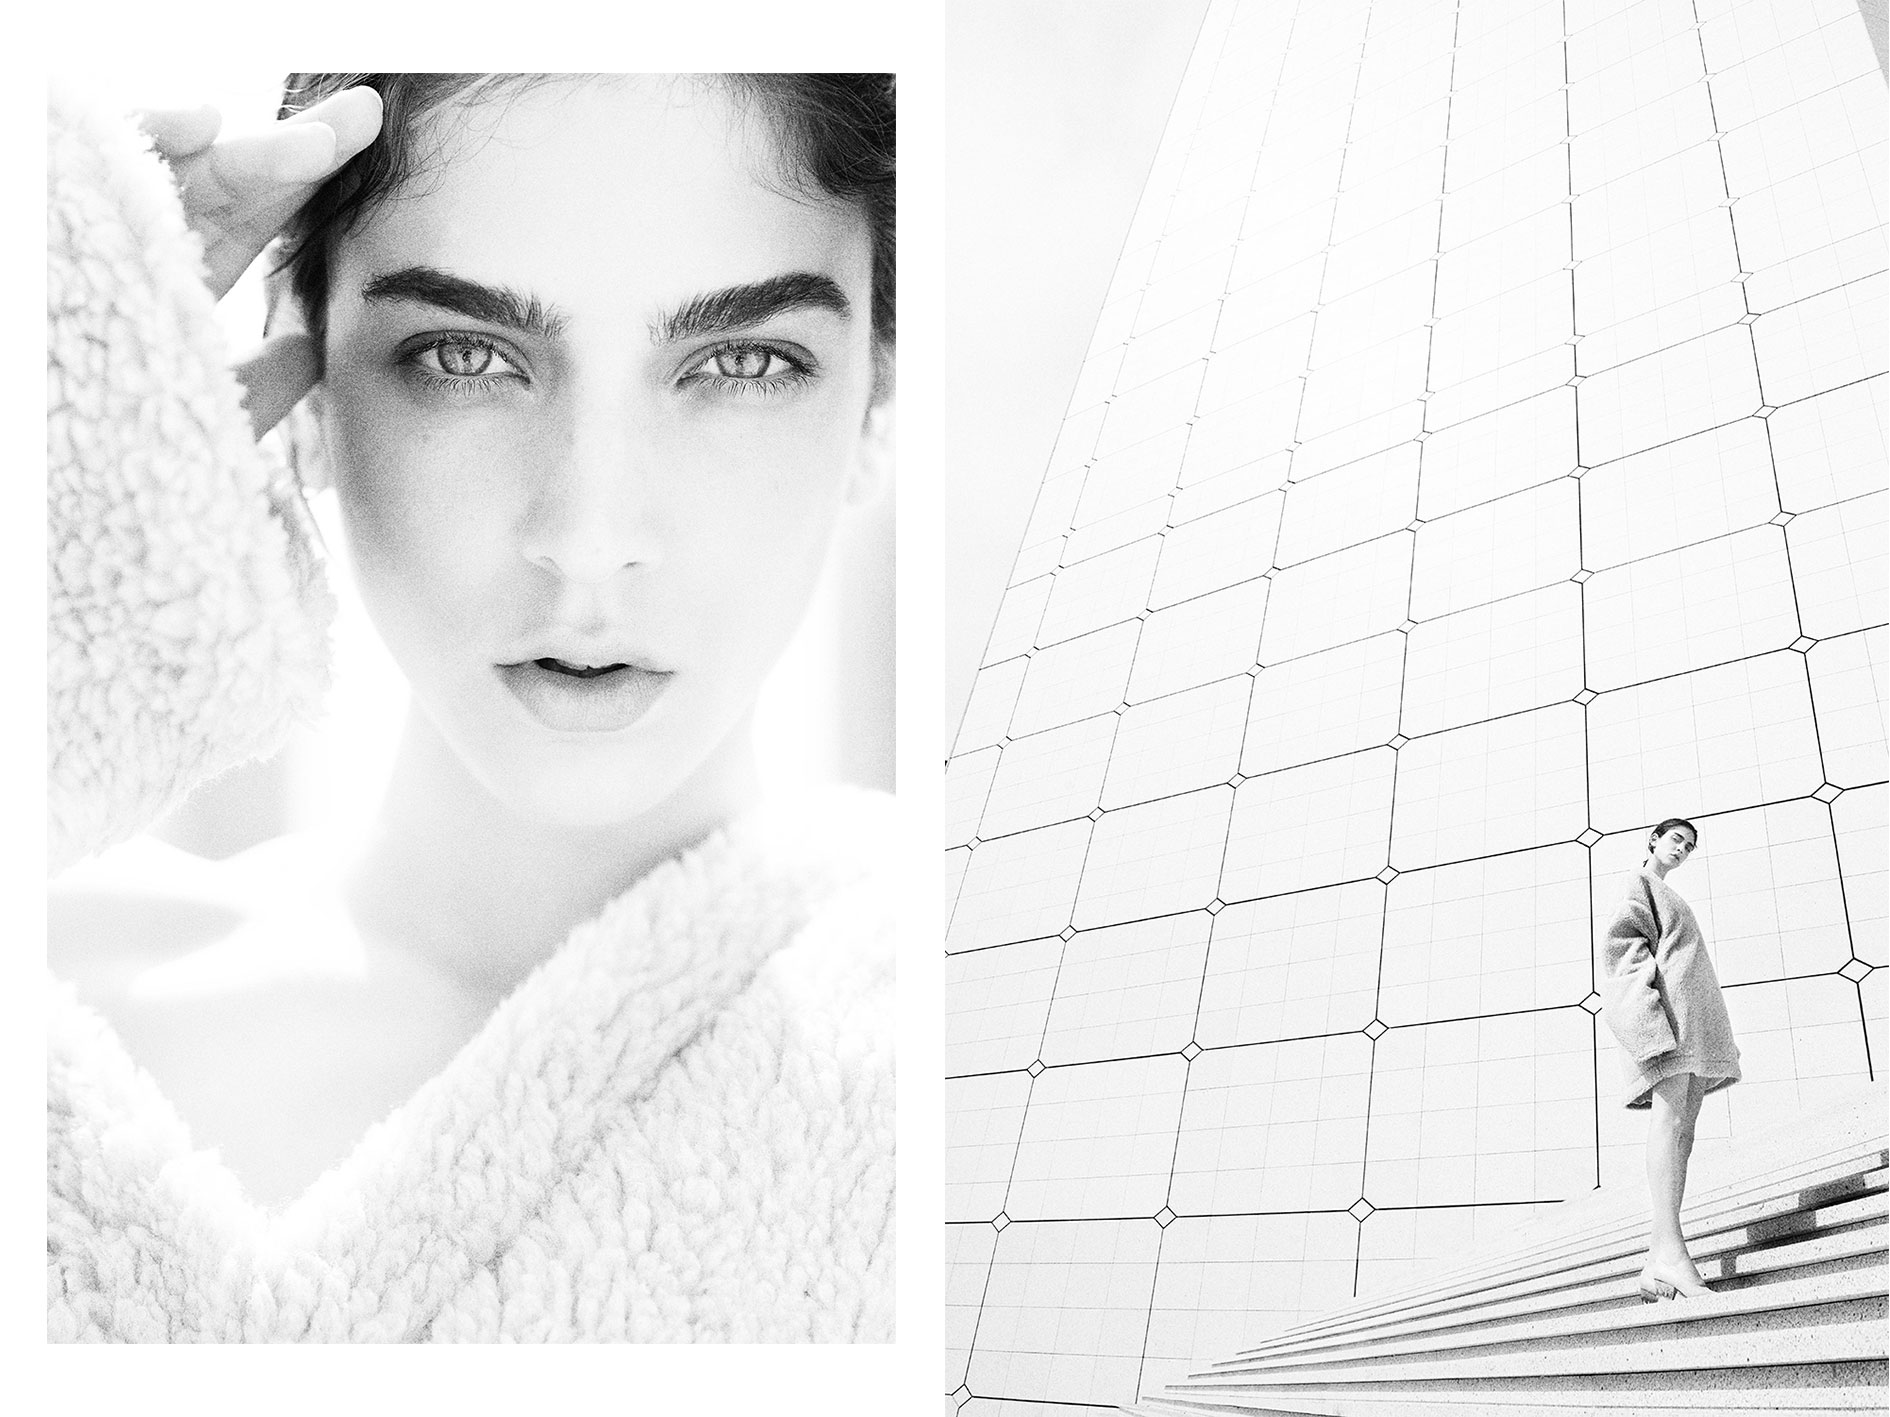 Black and white photography by Benjamin Tietge for MONROWE magazine